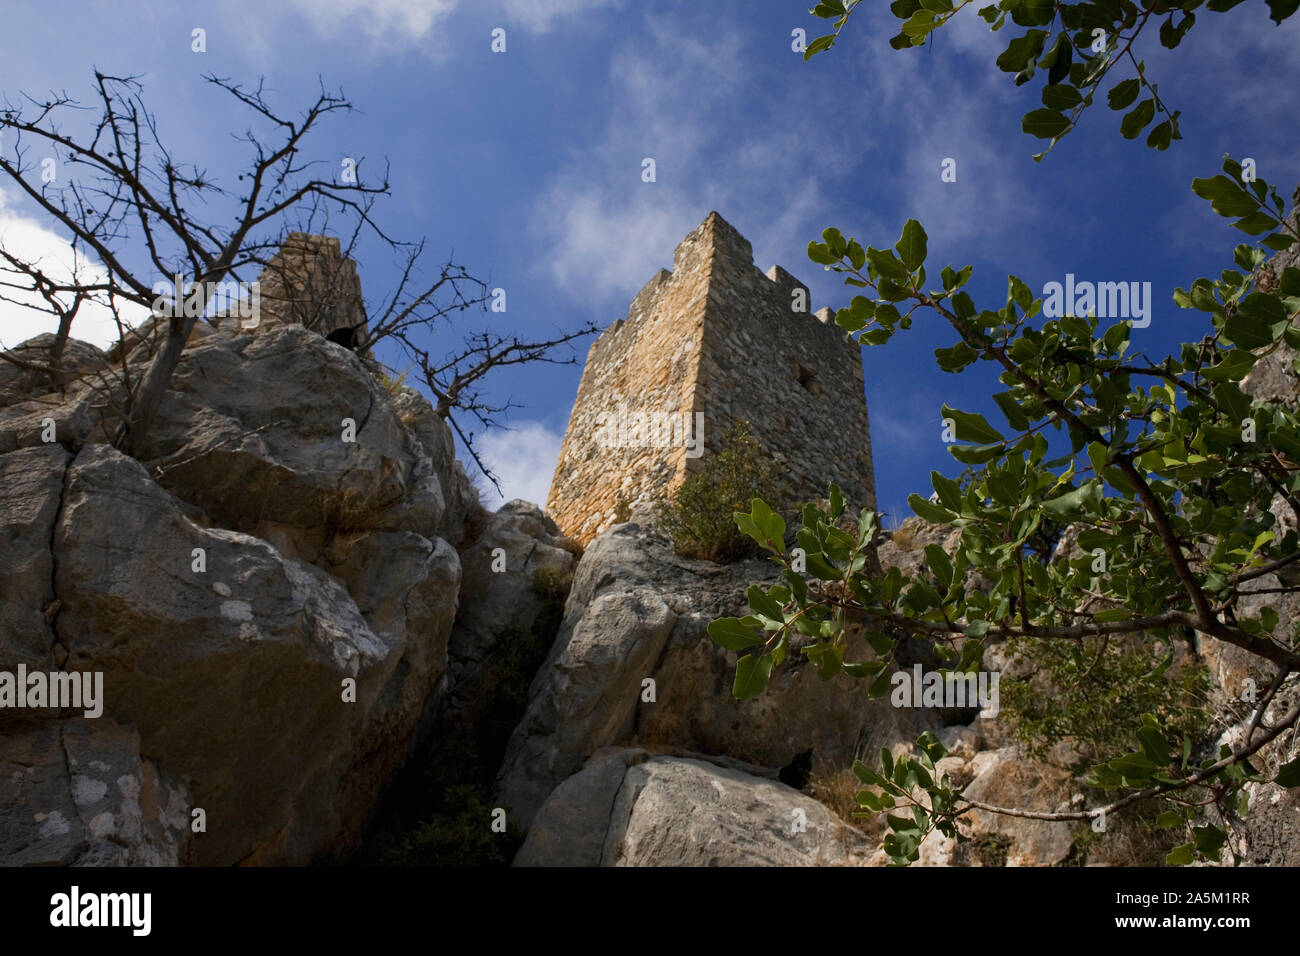 View of Prince John Tower, Saint Hilarion Castle, Northern Cyprus Stock Photo